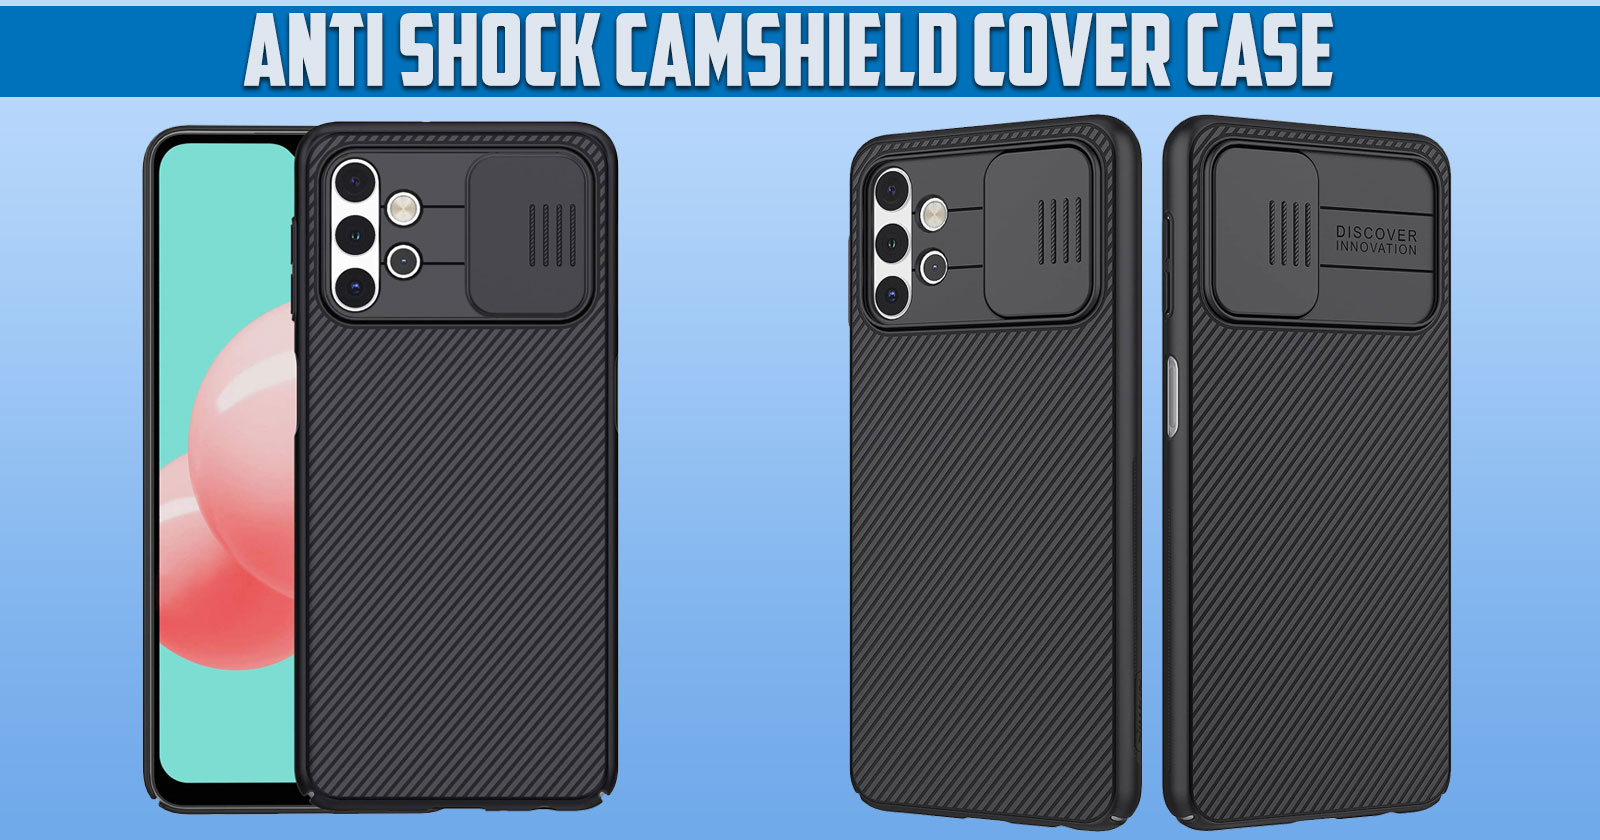 Anti Shock CamShield Cover Case for Samsung Galaxy A32 5G